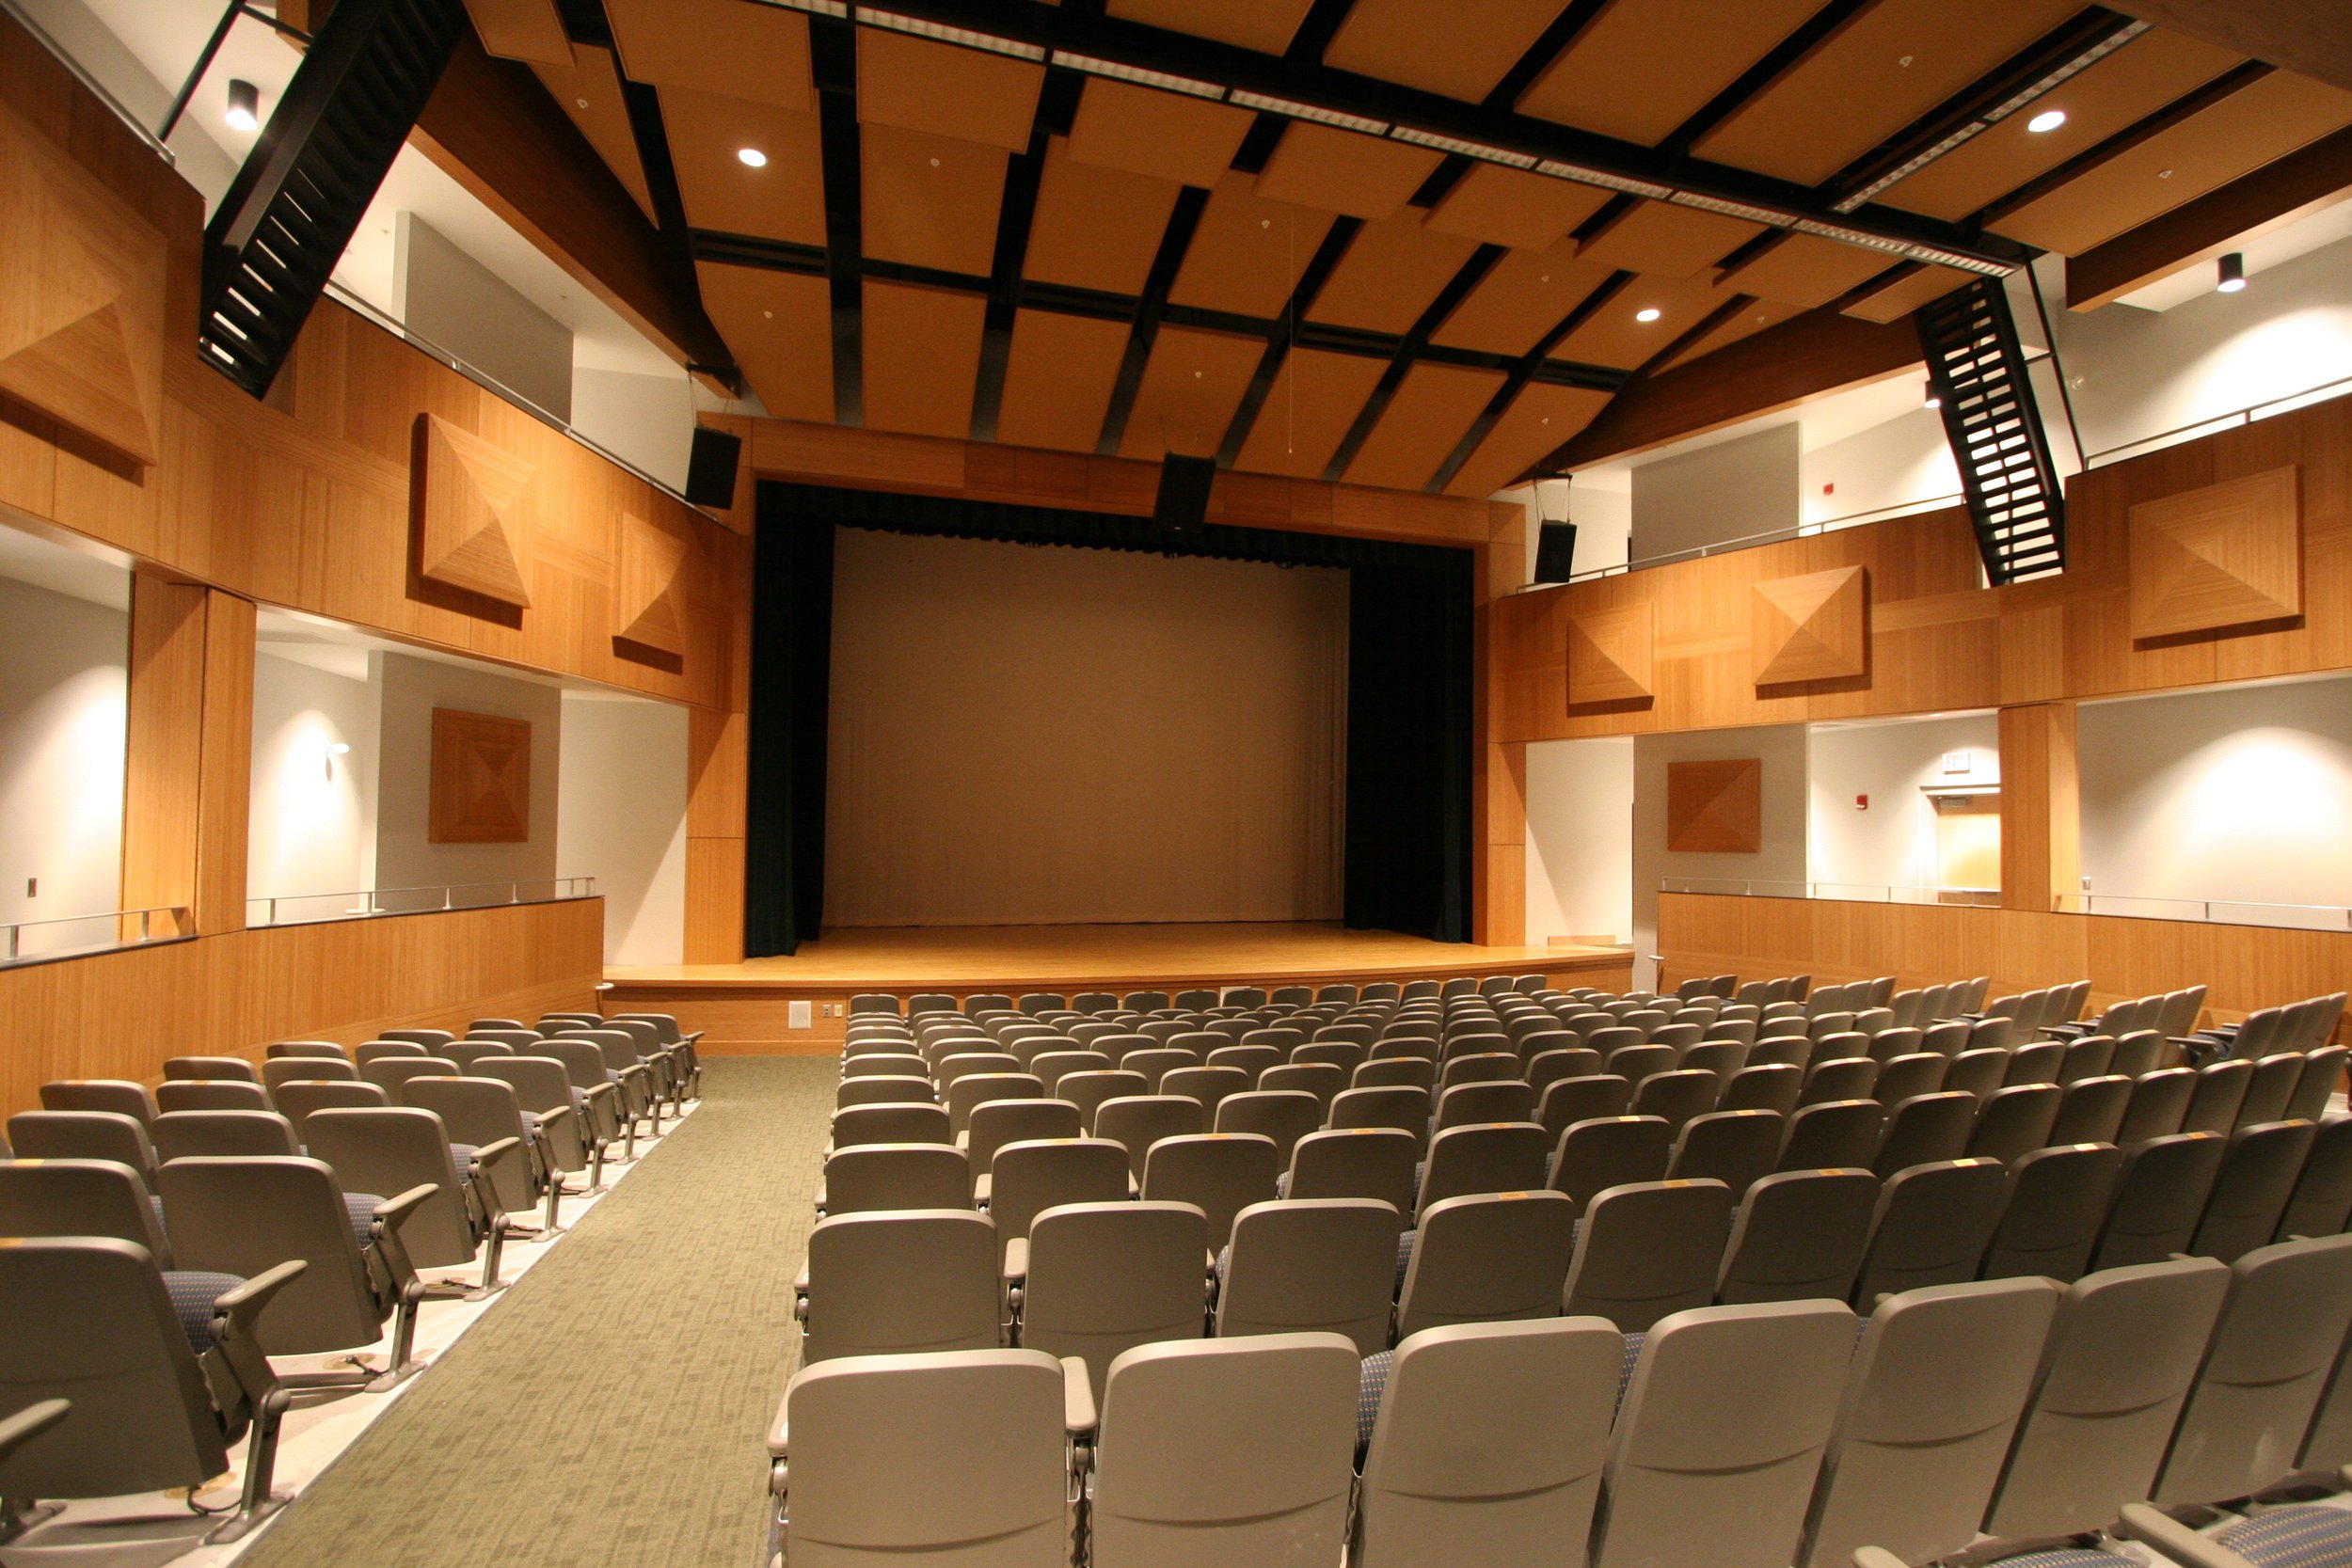 Mount+View+High+School+Theatrical+Lighting+Port+Lighting+Systems-1